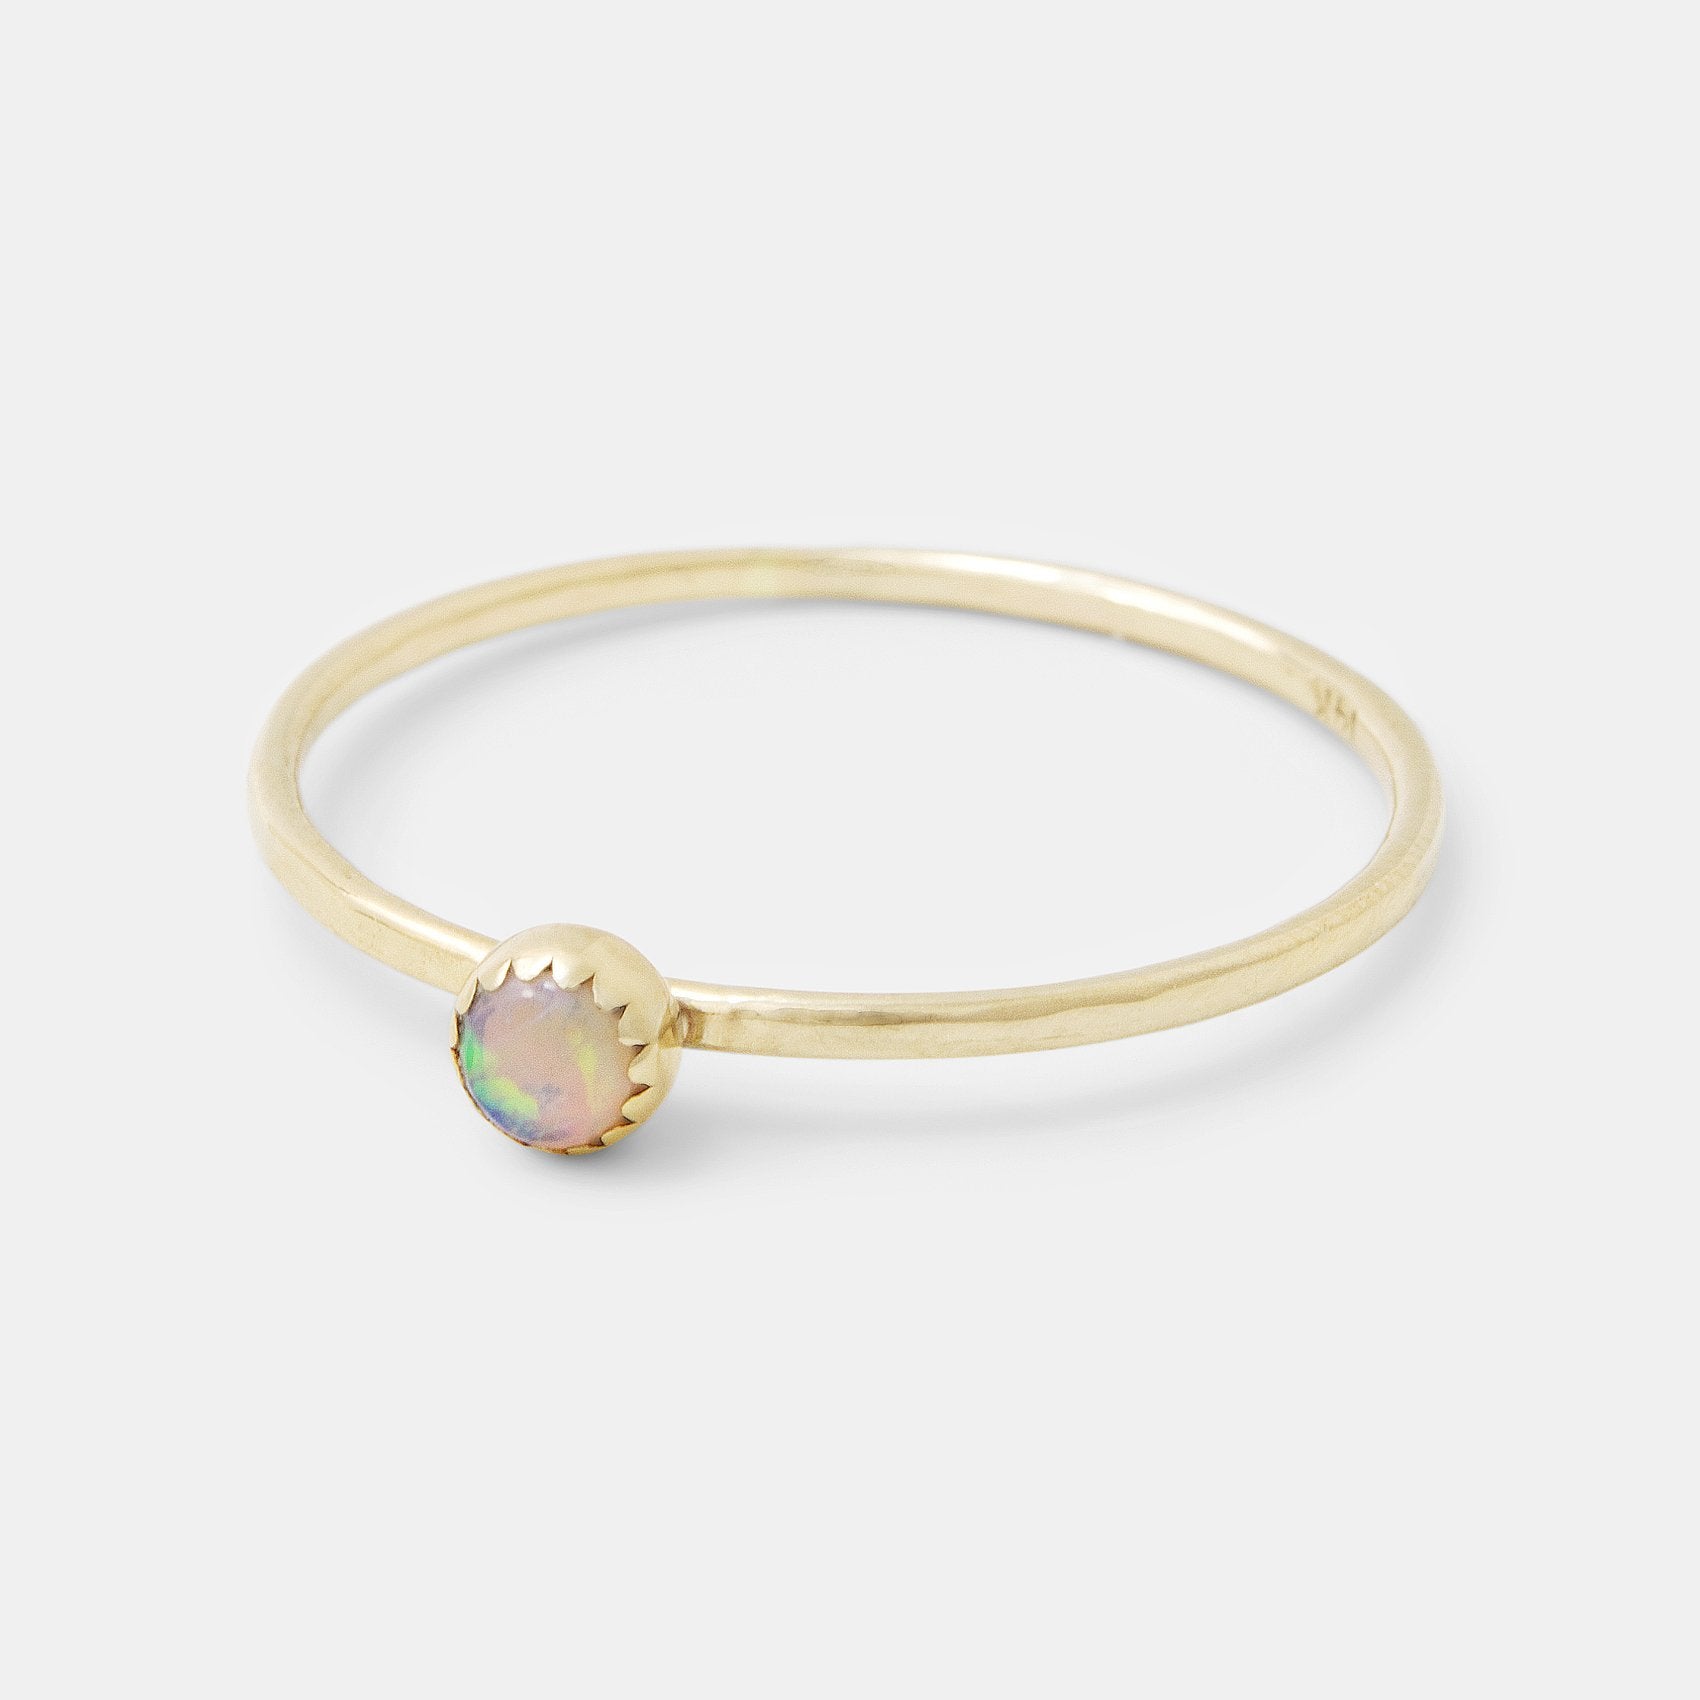 Opal & solid gold stacking ring - Simone Walsh Jewellery Australia